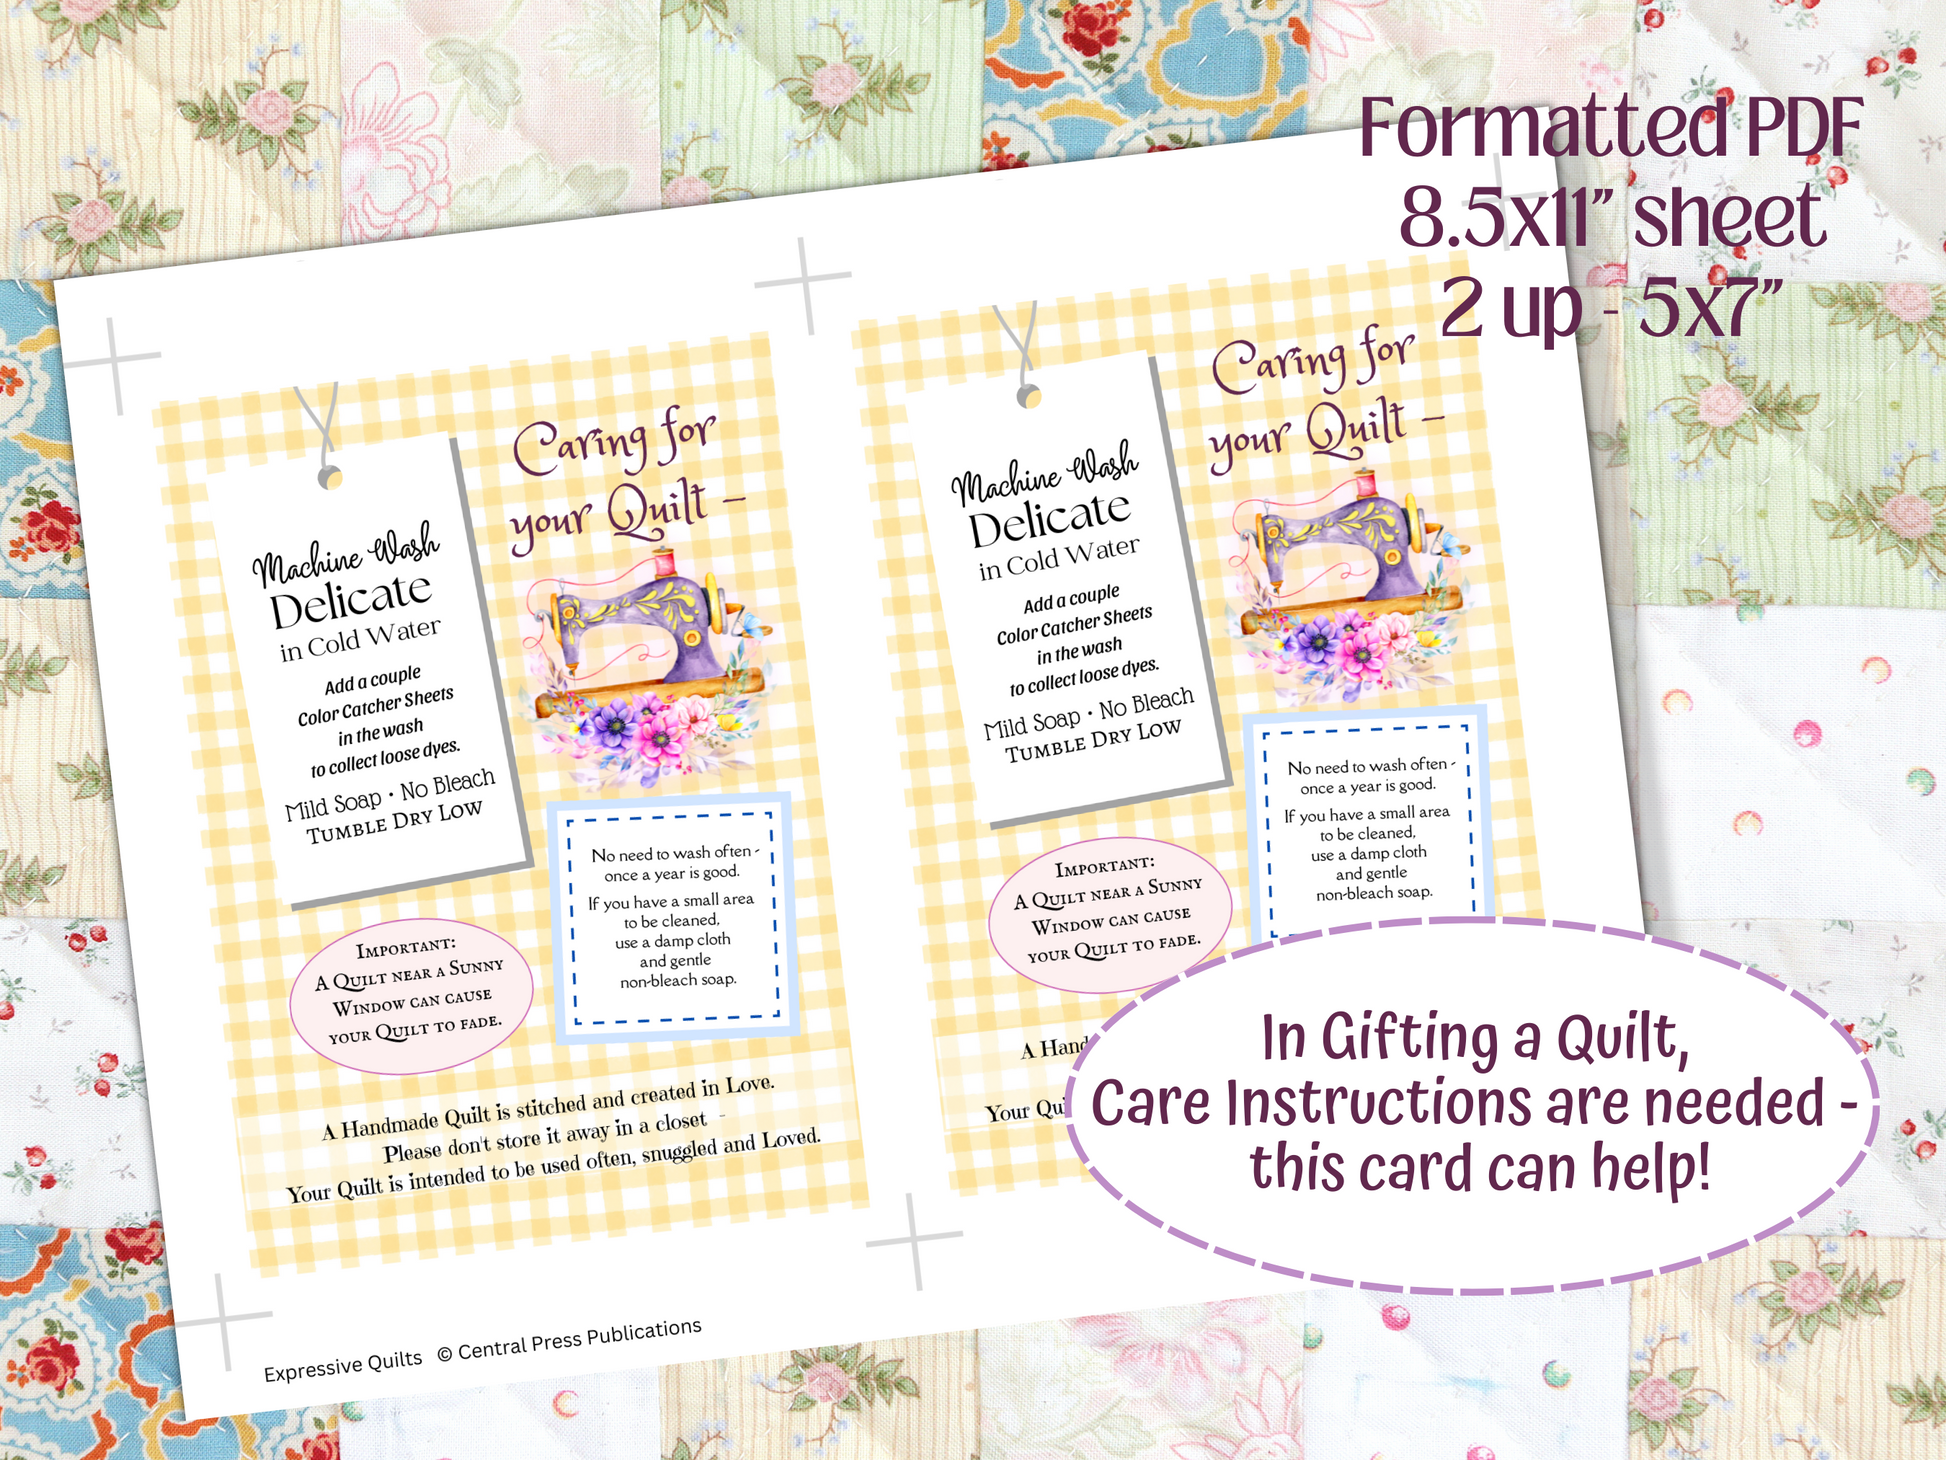 quilt care card example pdf